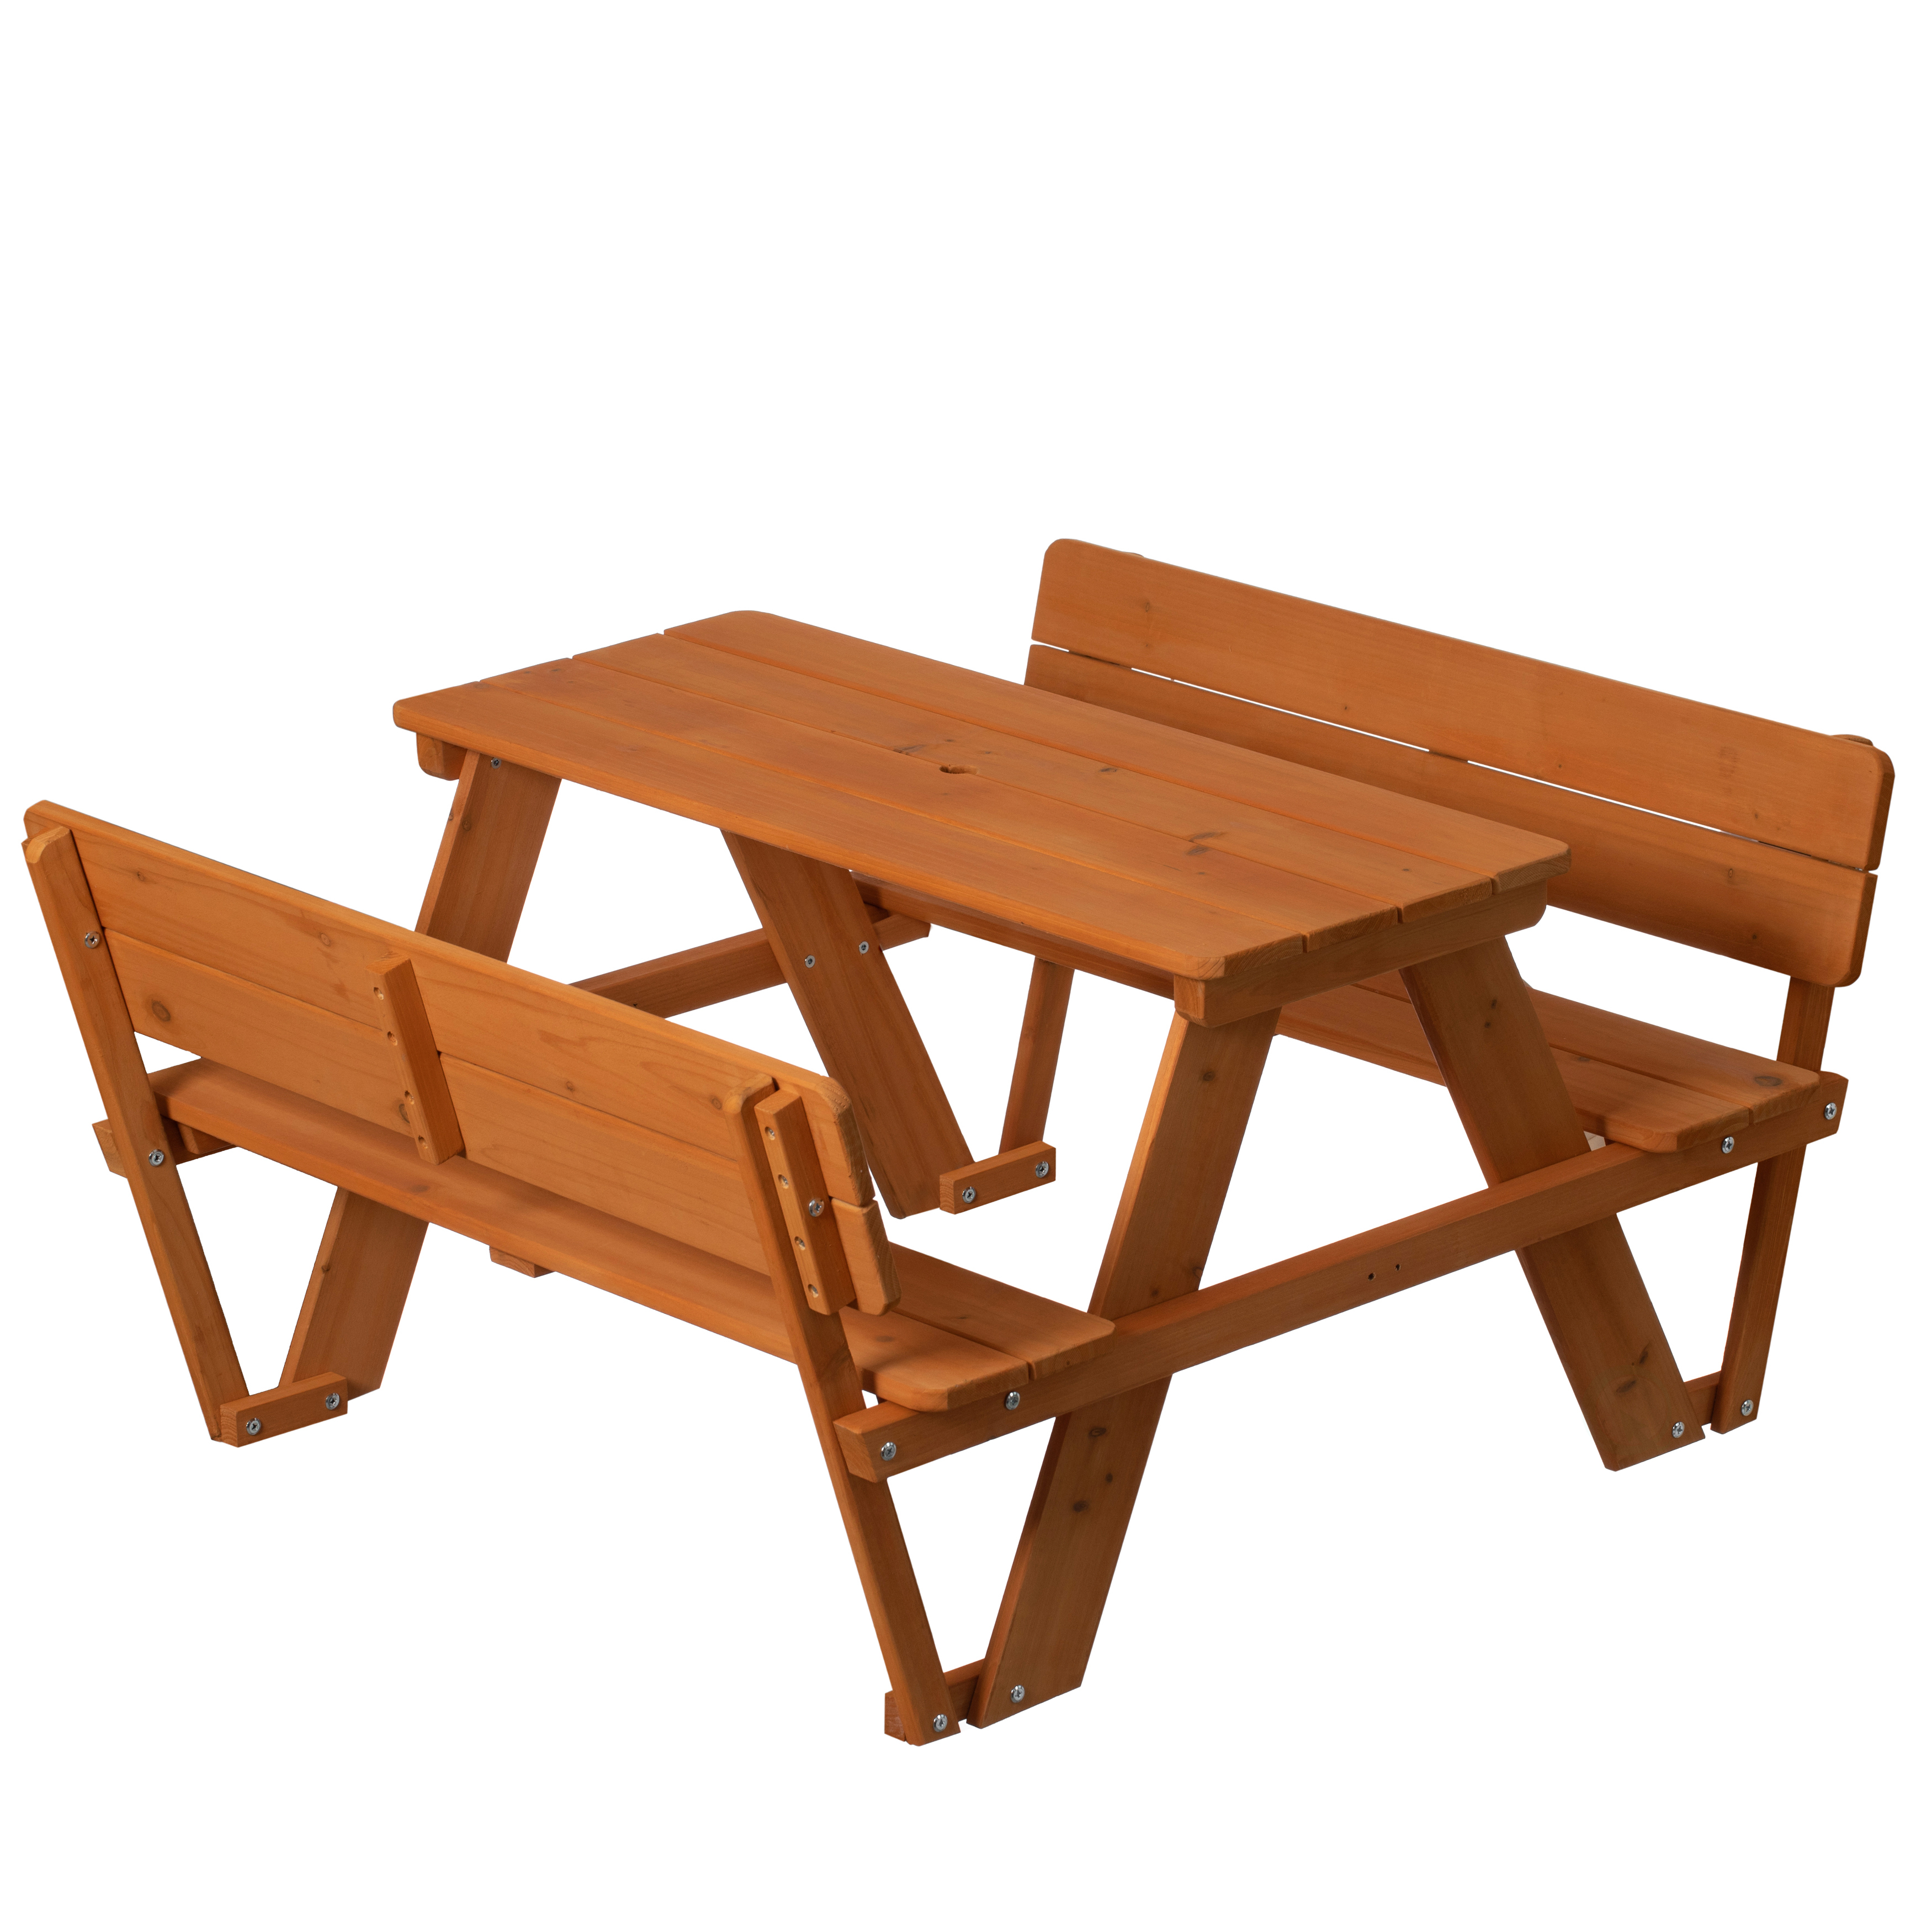 Wooden Kids Picnic Table Bench With Backrest, Outdoor Children's Backyard Table, Crafting, Dining, And Playtime Patio Table